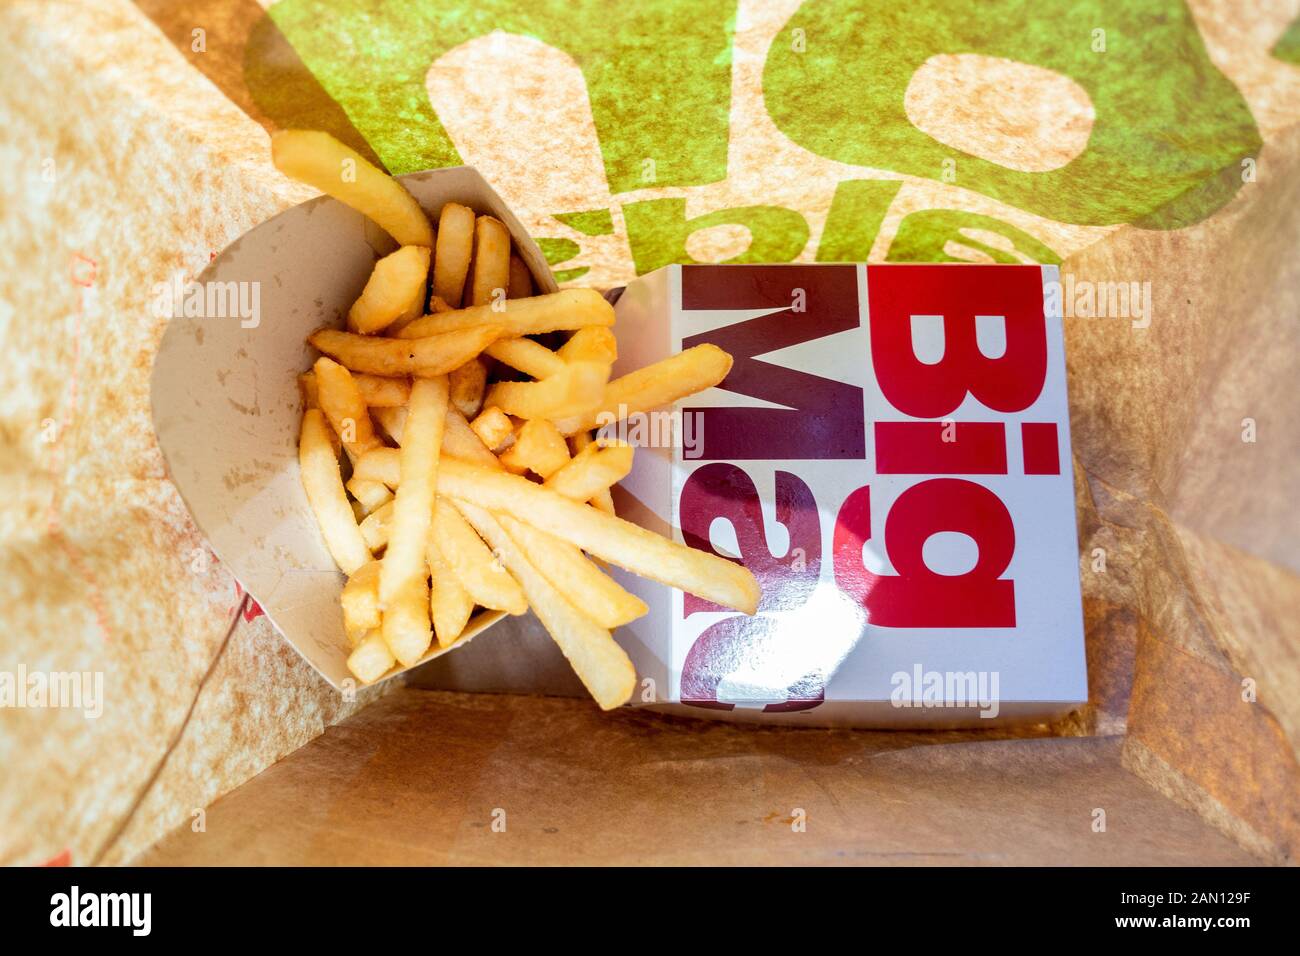 Big Mac Burger and French Fries from a McDoanld's restaurant Stock Photo